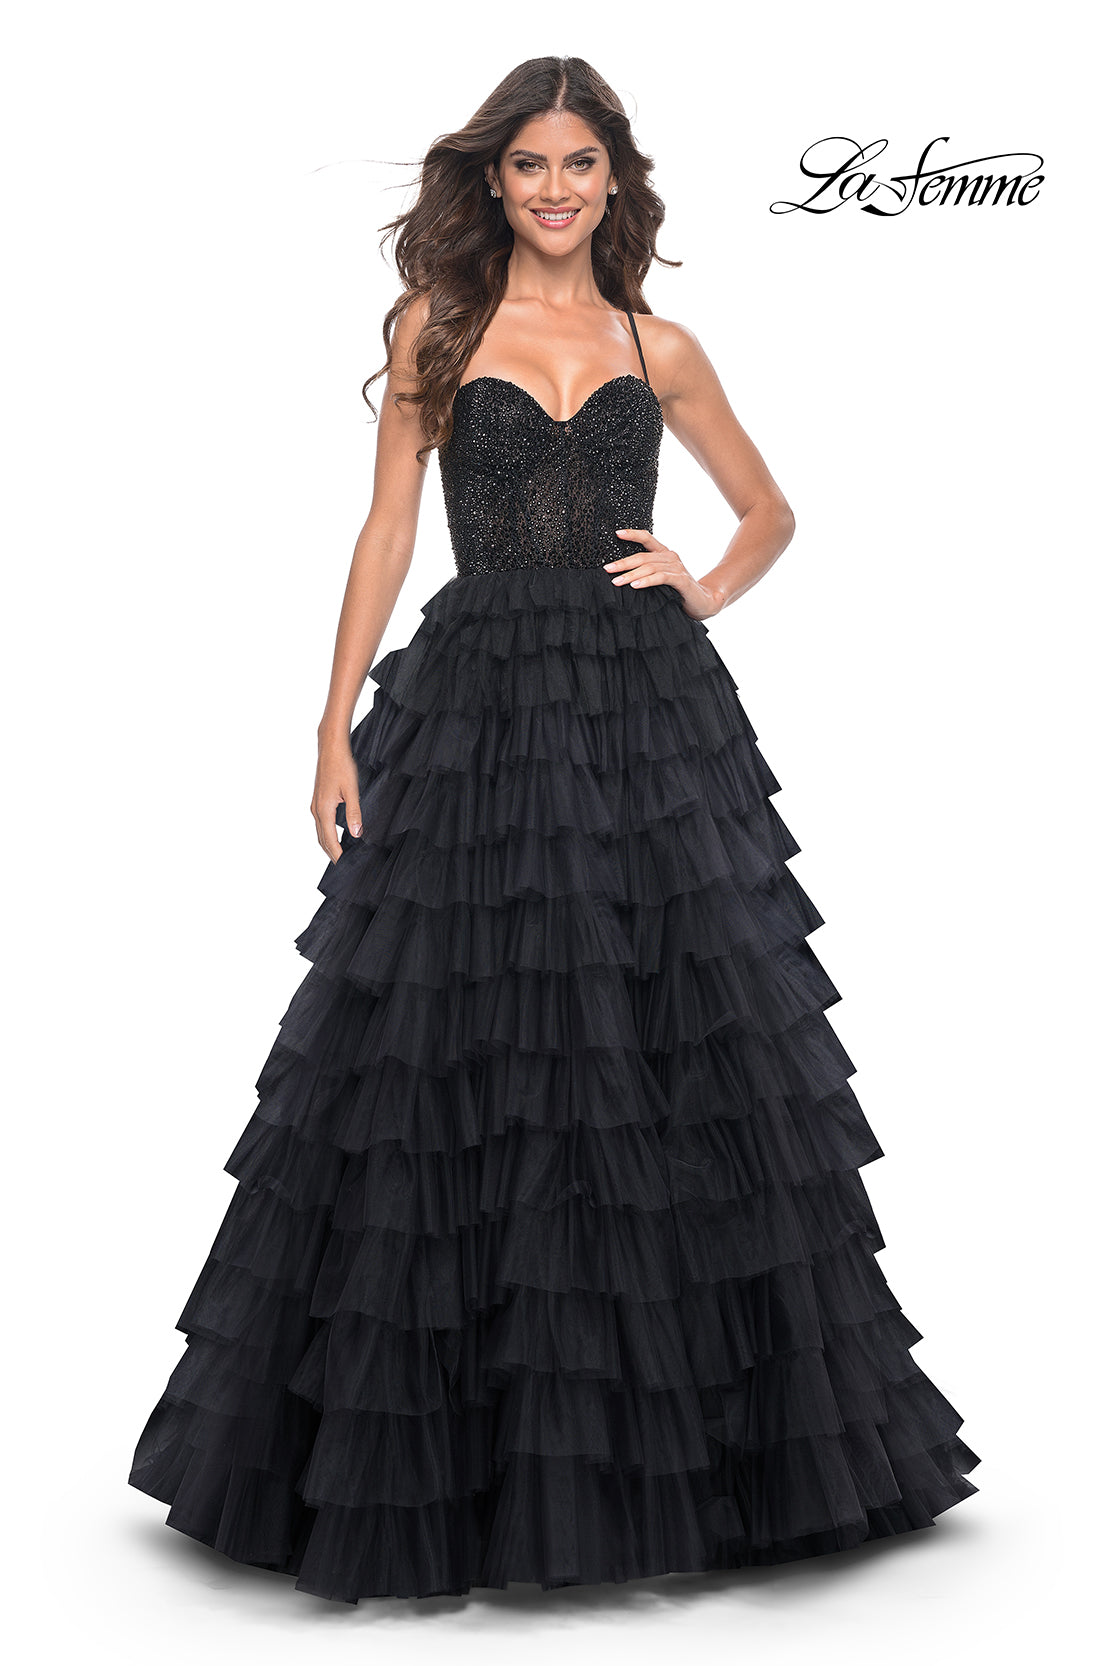 La-Femme-32002-Sweetheart-Neckline-Lace-up-Back-High-Slit-Hot-Stone-Tulle-Ball-Gowns-Black-Evening-Dress-B-Chic-Fashions-Prom-Dress